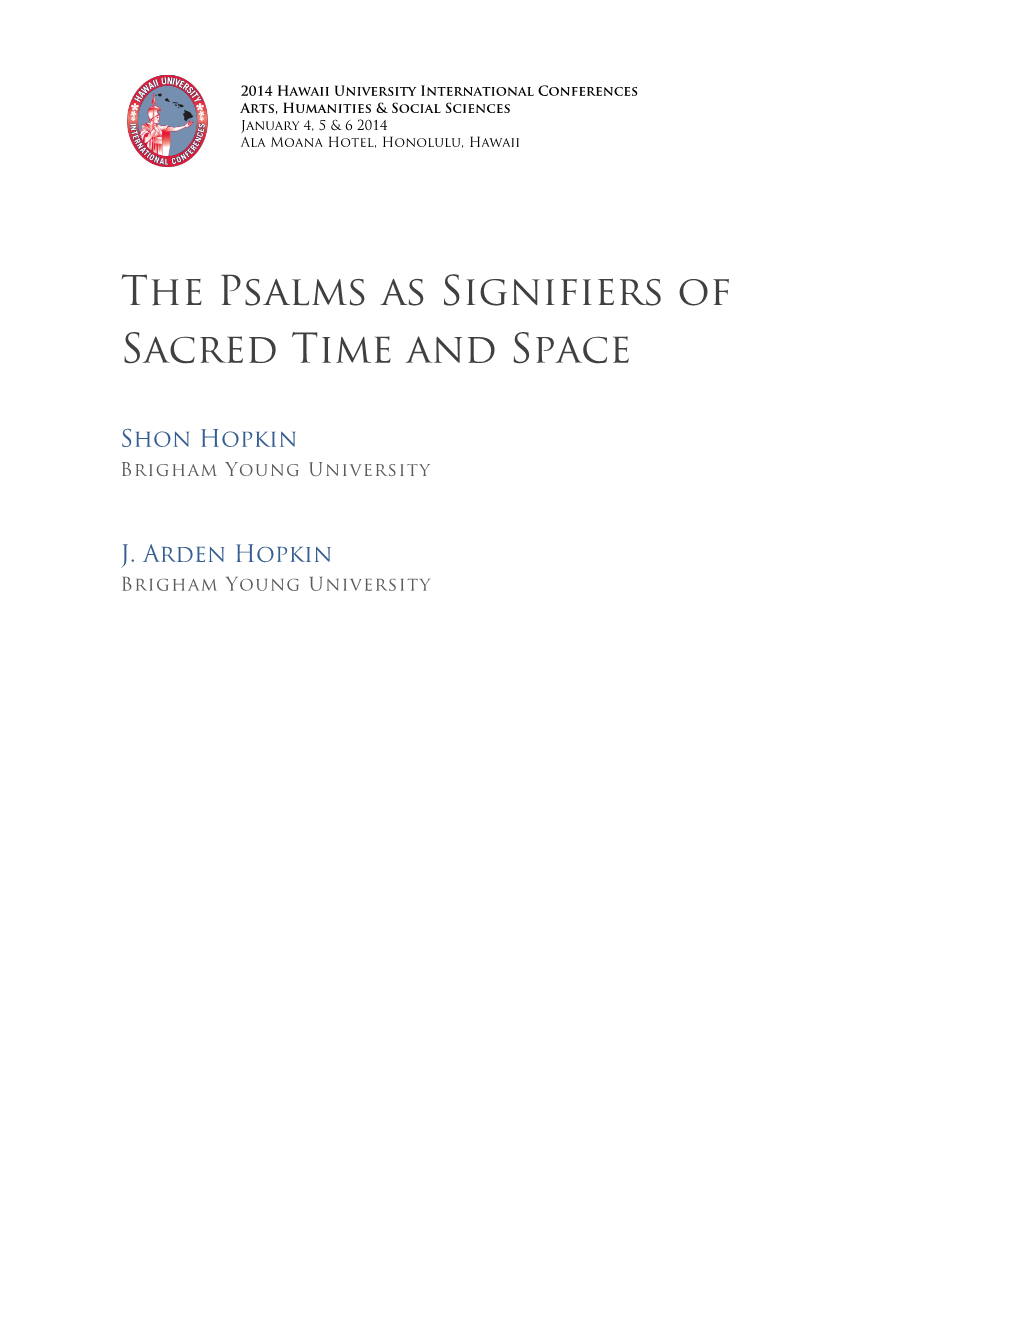 The Psalms As Signifiers of Sacred Time and Space